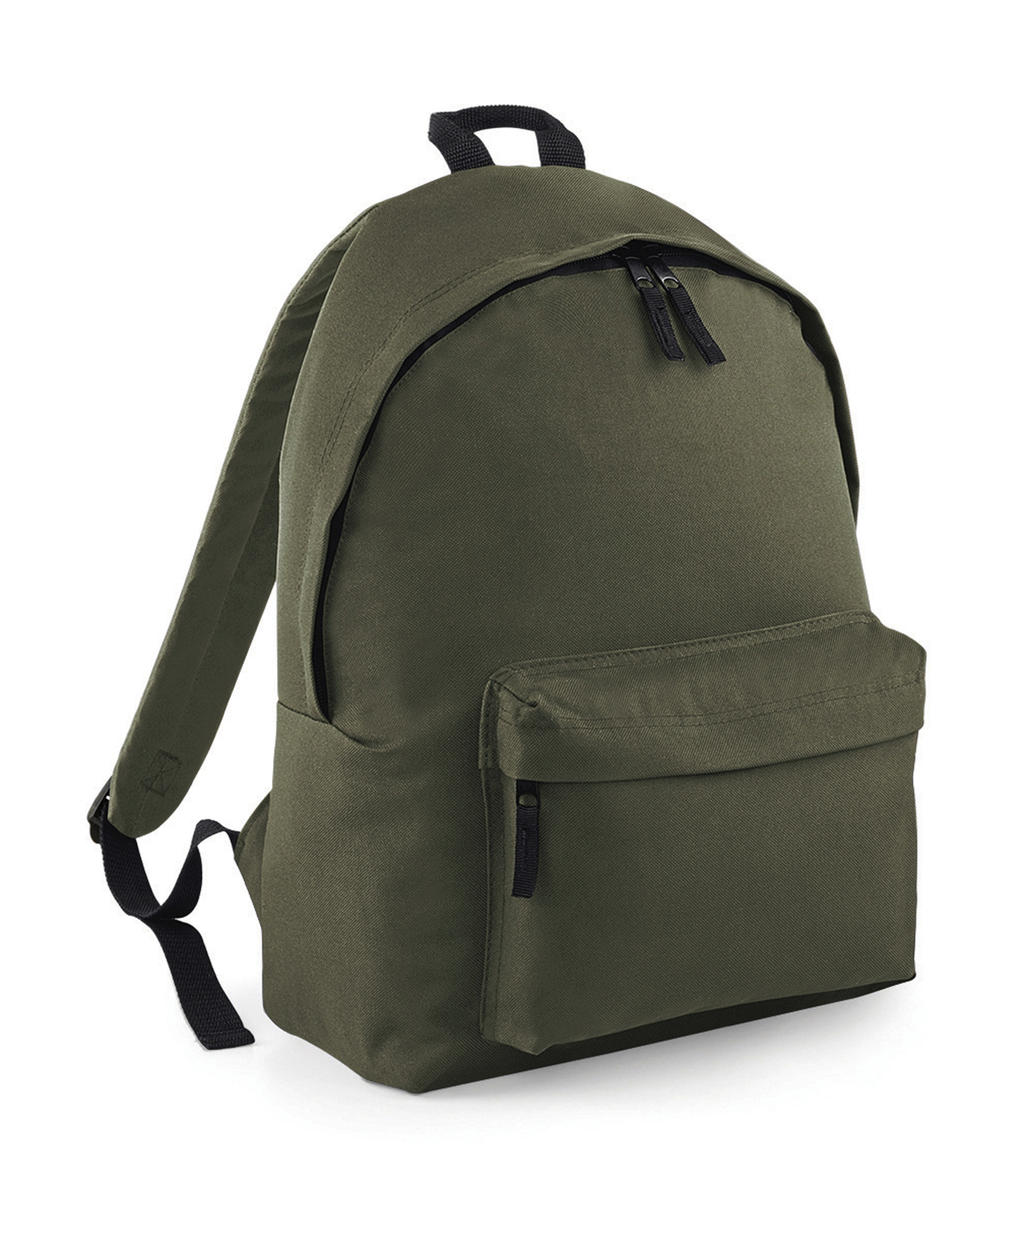  Original Fashion Backpack in Farbe Olive Green